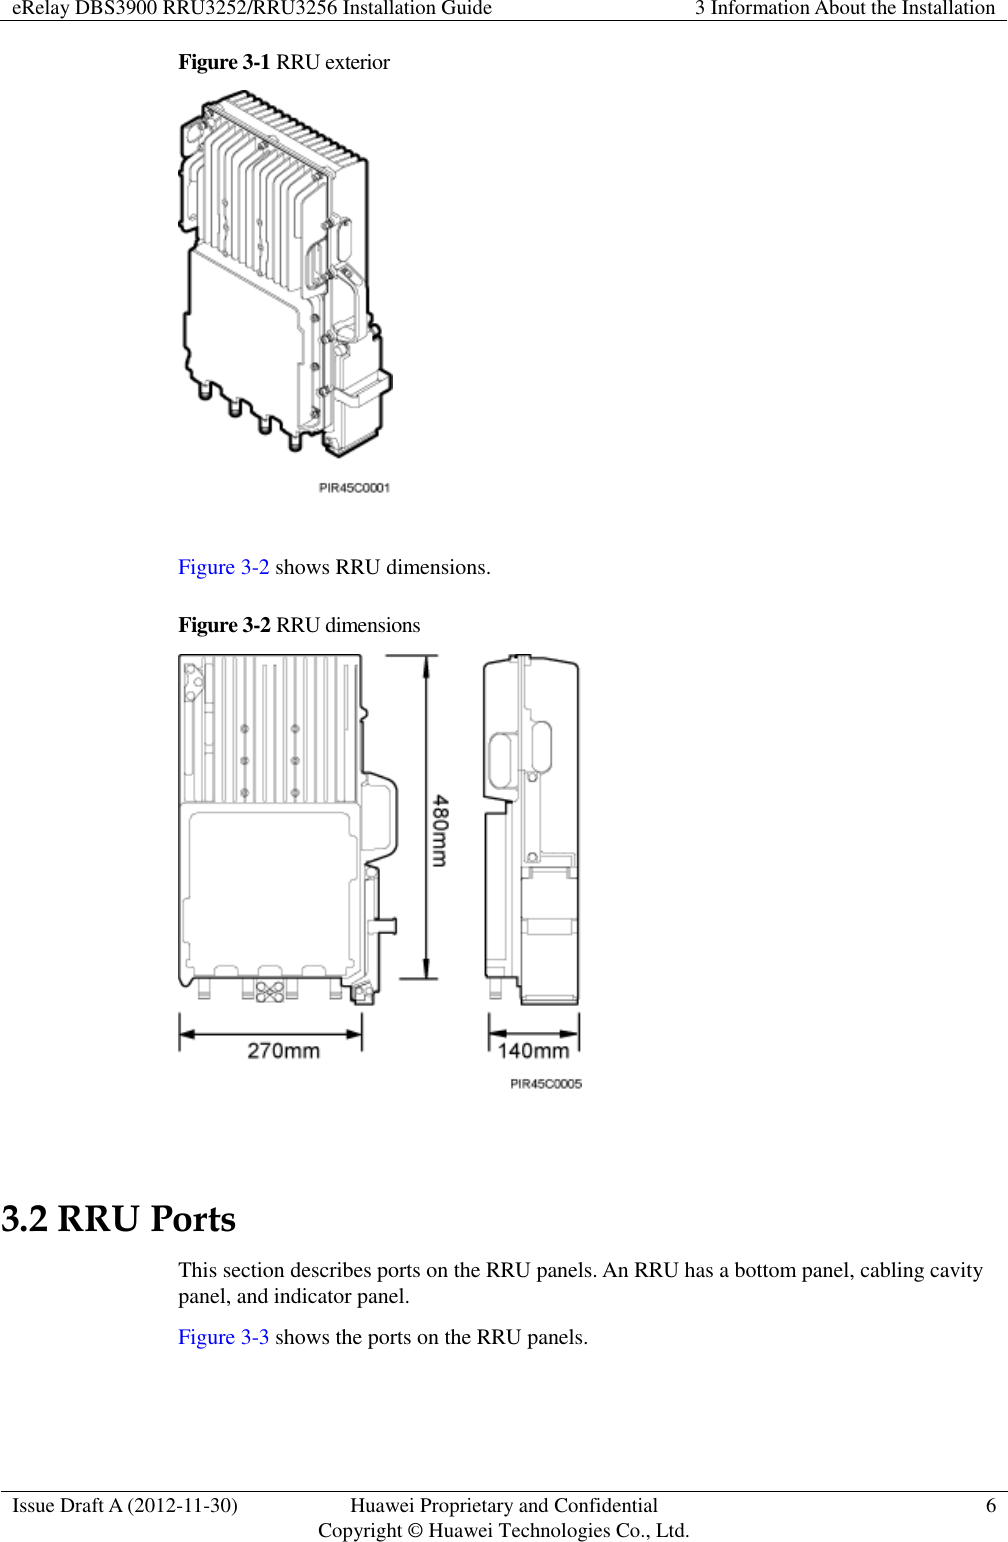 eRelay DBS3900 RRU3252/RRU3256 Installation Guide 3 Information About the Installation  Issue Draft A (2012-11-30) Huawei Proprietary and Confidential                                     Copyright © Huawei Technologies Co., Ltd. 6  Figure 3-1 RRU exterior   Figure 3-2 shows RRU dimensions. Figure 3-2 RRU dimensions   3.2 RRU Ports This section describes ports on the RRU panels. An RRU has a bottom panel, cabling cavity panel, and indicator panel. Figure 3-3 shows the ports on the RRU panels. 